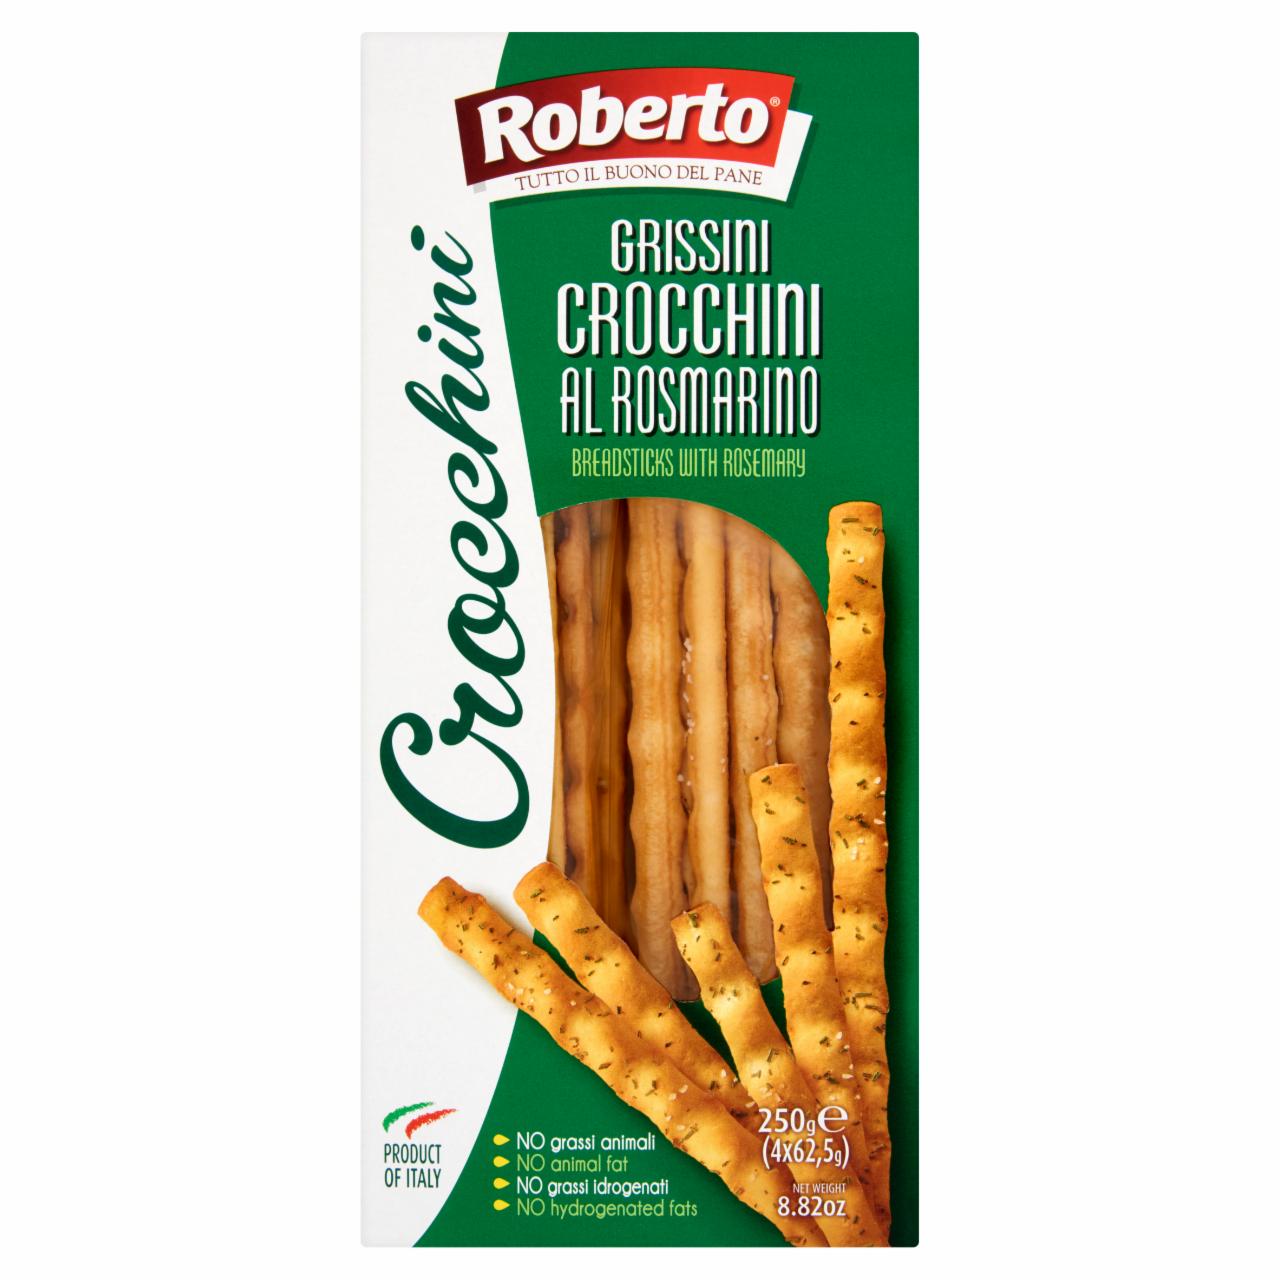 Фото - Crocchini Breadsticks with Palm Oil and Rosemary Roberto